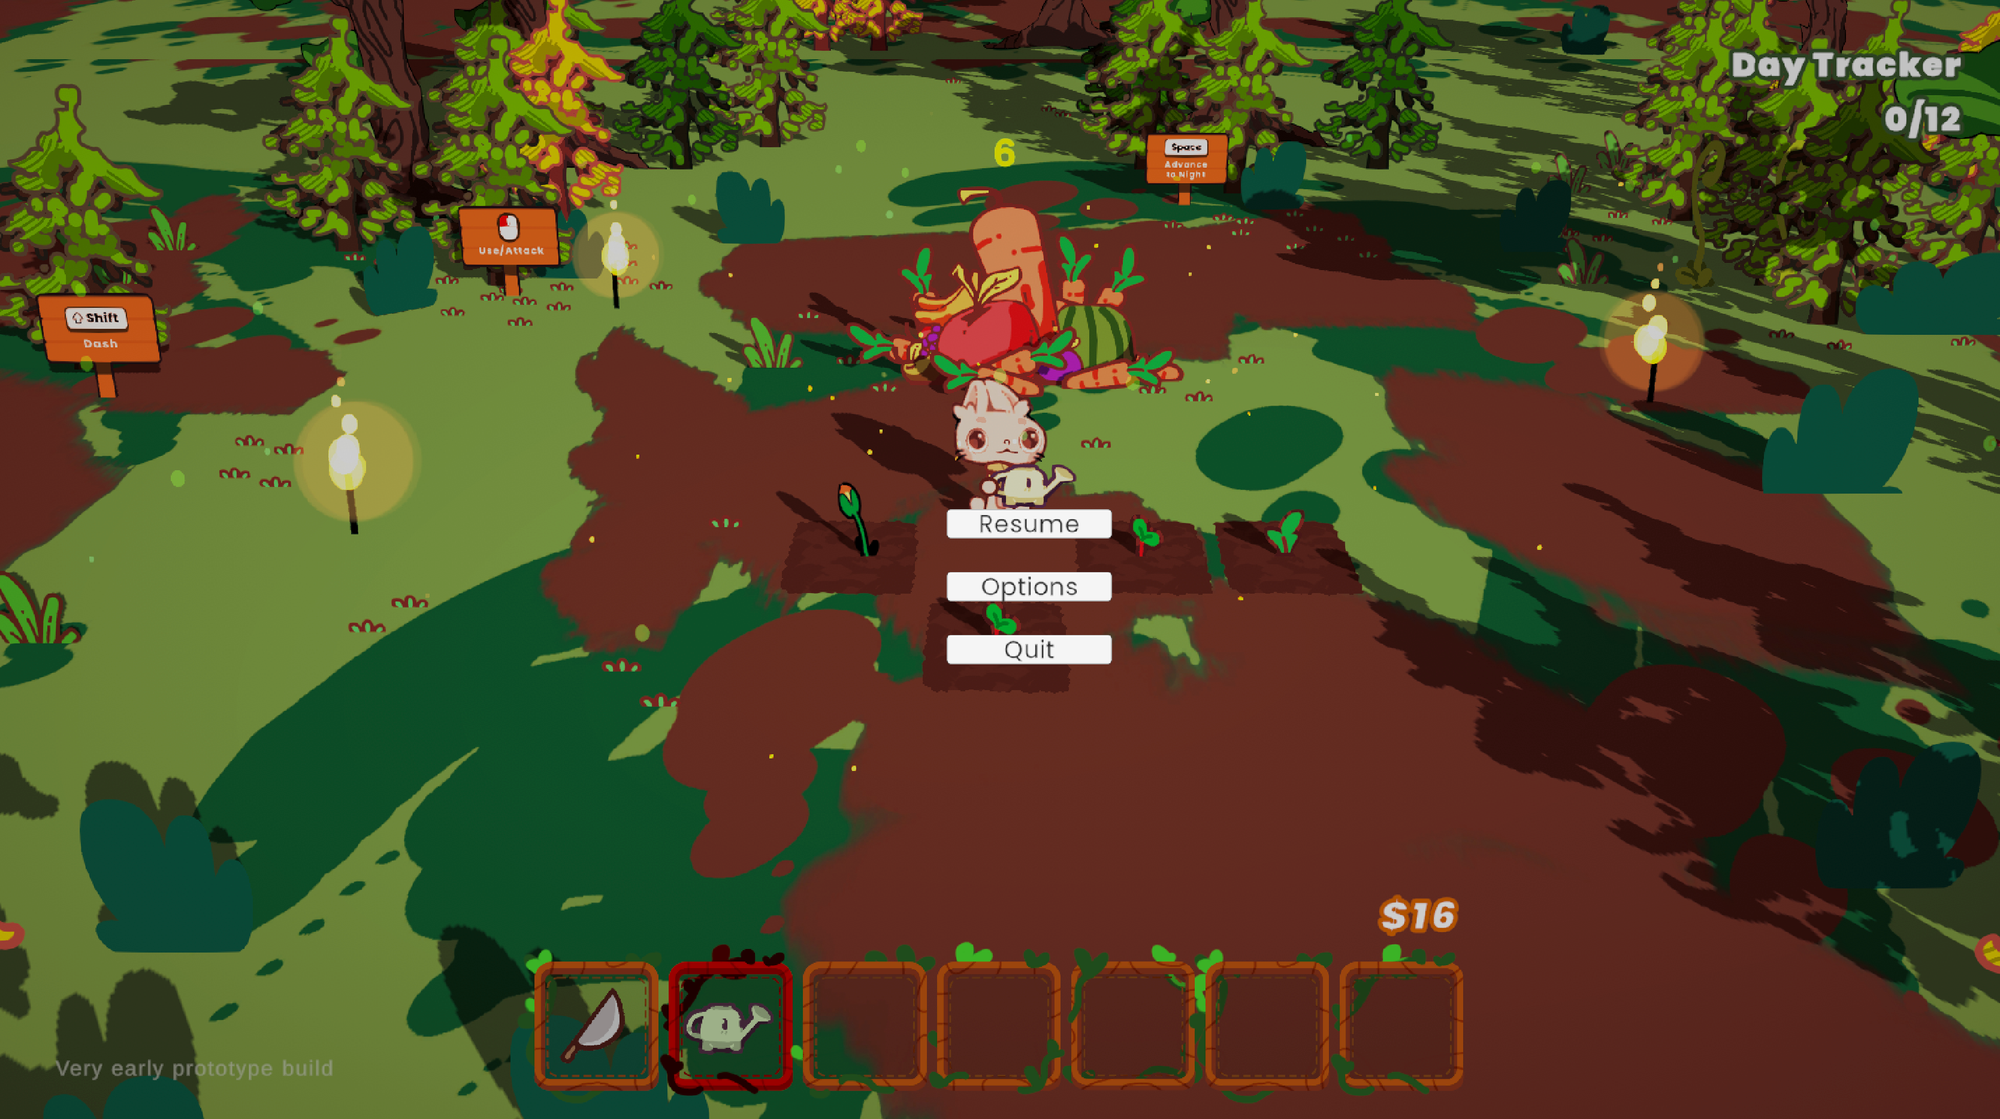 Screenshot in-game of The Rabbit Haul, featuring a basic pause menu overlay on top of a green and brown forest floor